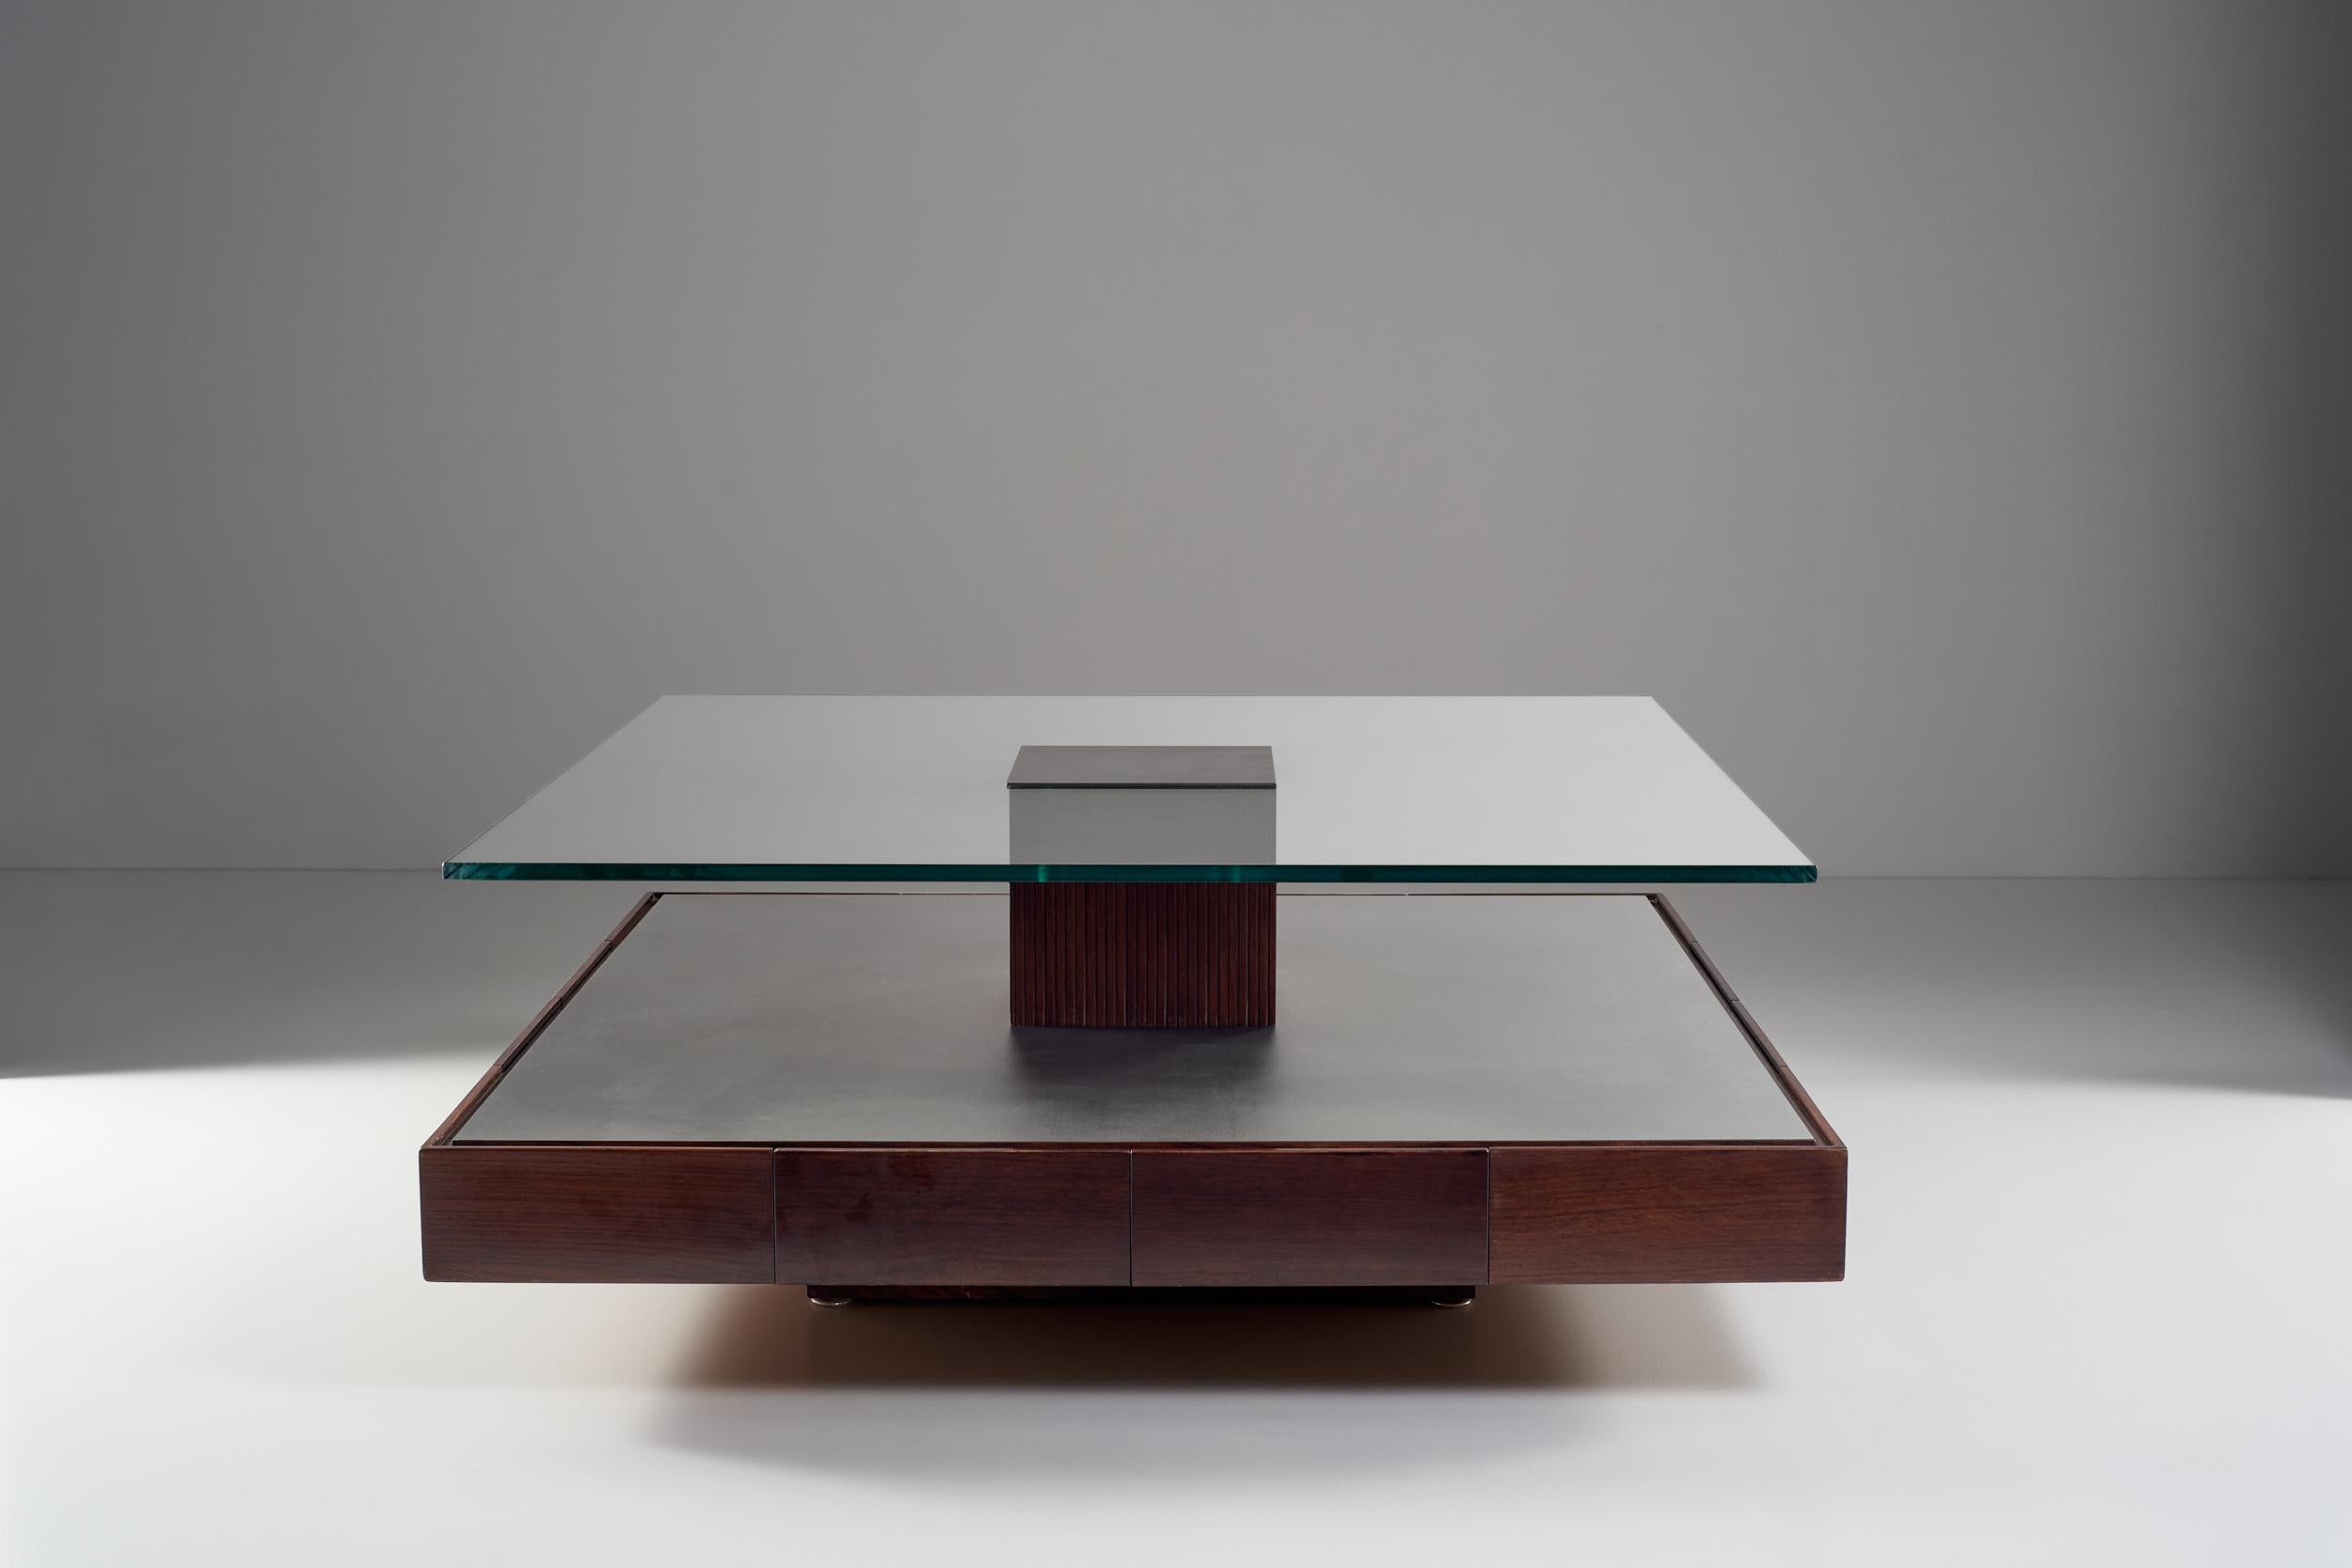 This low living room table with cantilevered glass on square central support is a perfect solution if you need discreet surfaces and hidden spaces for all your needs.
Lightness and functional stability are the key concepts behind this unique item: